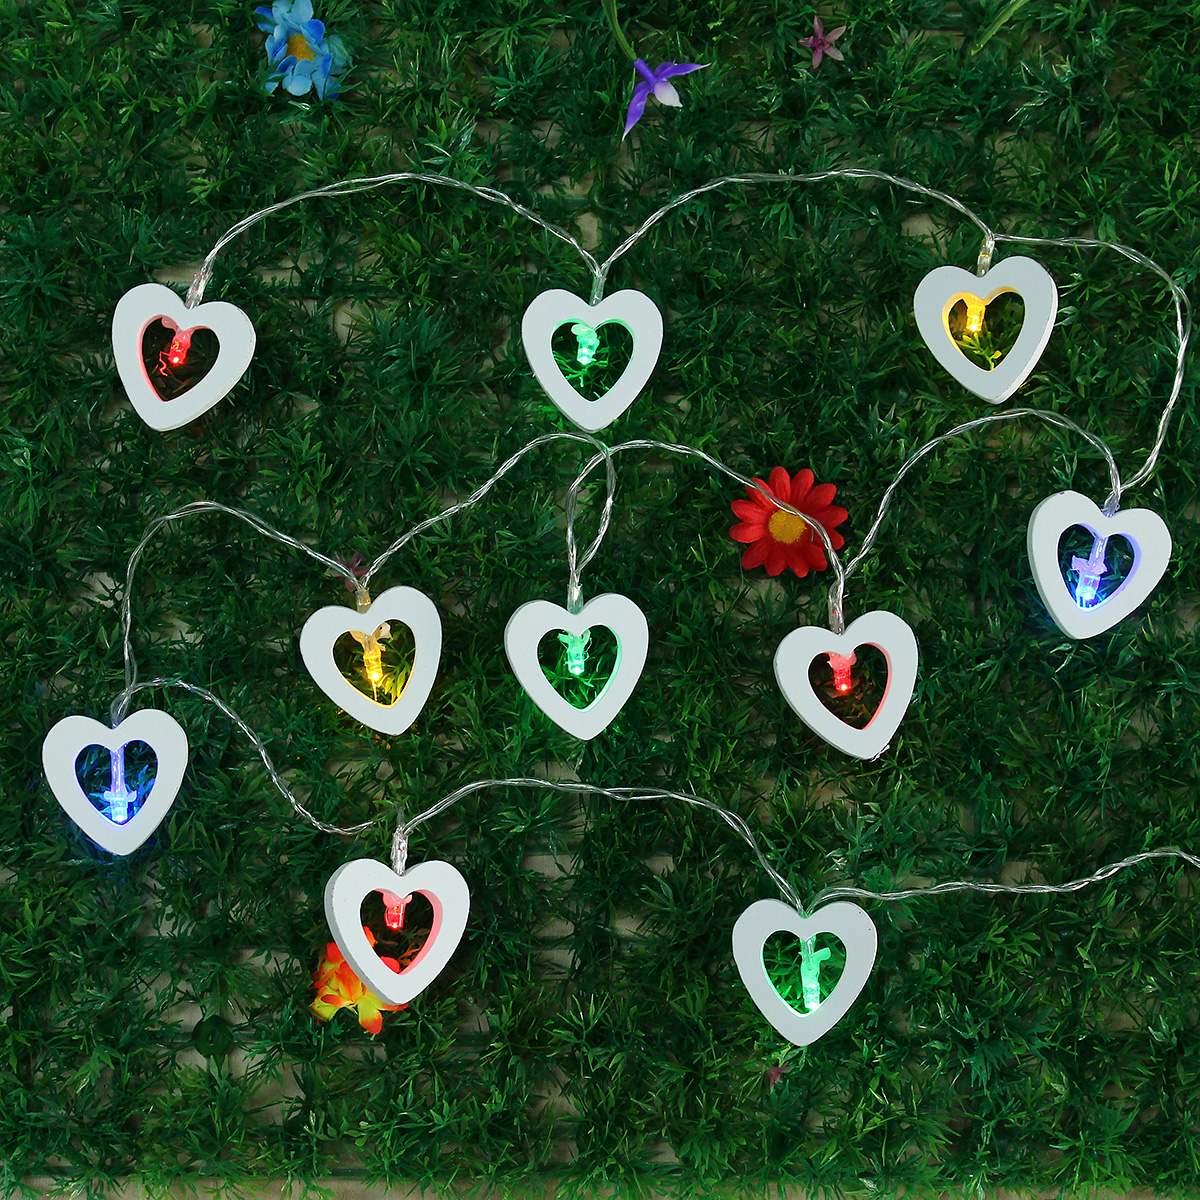 18M-03W-Wooden-Heart-Shape-Battery-Powered-10LED-Fairy-String-Light-for-Christmas-Home-Party-Decor-D-1630337-3